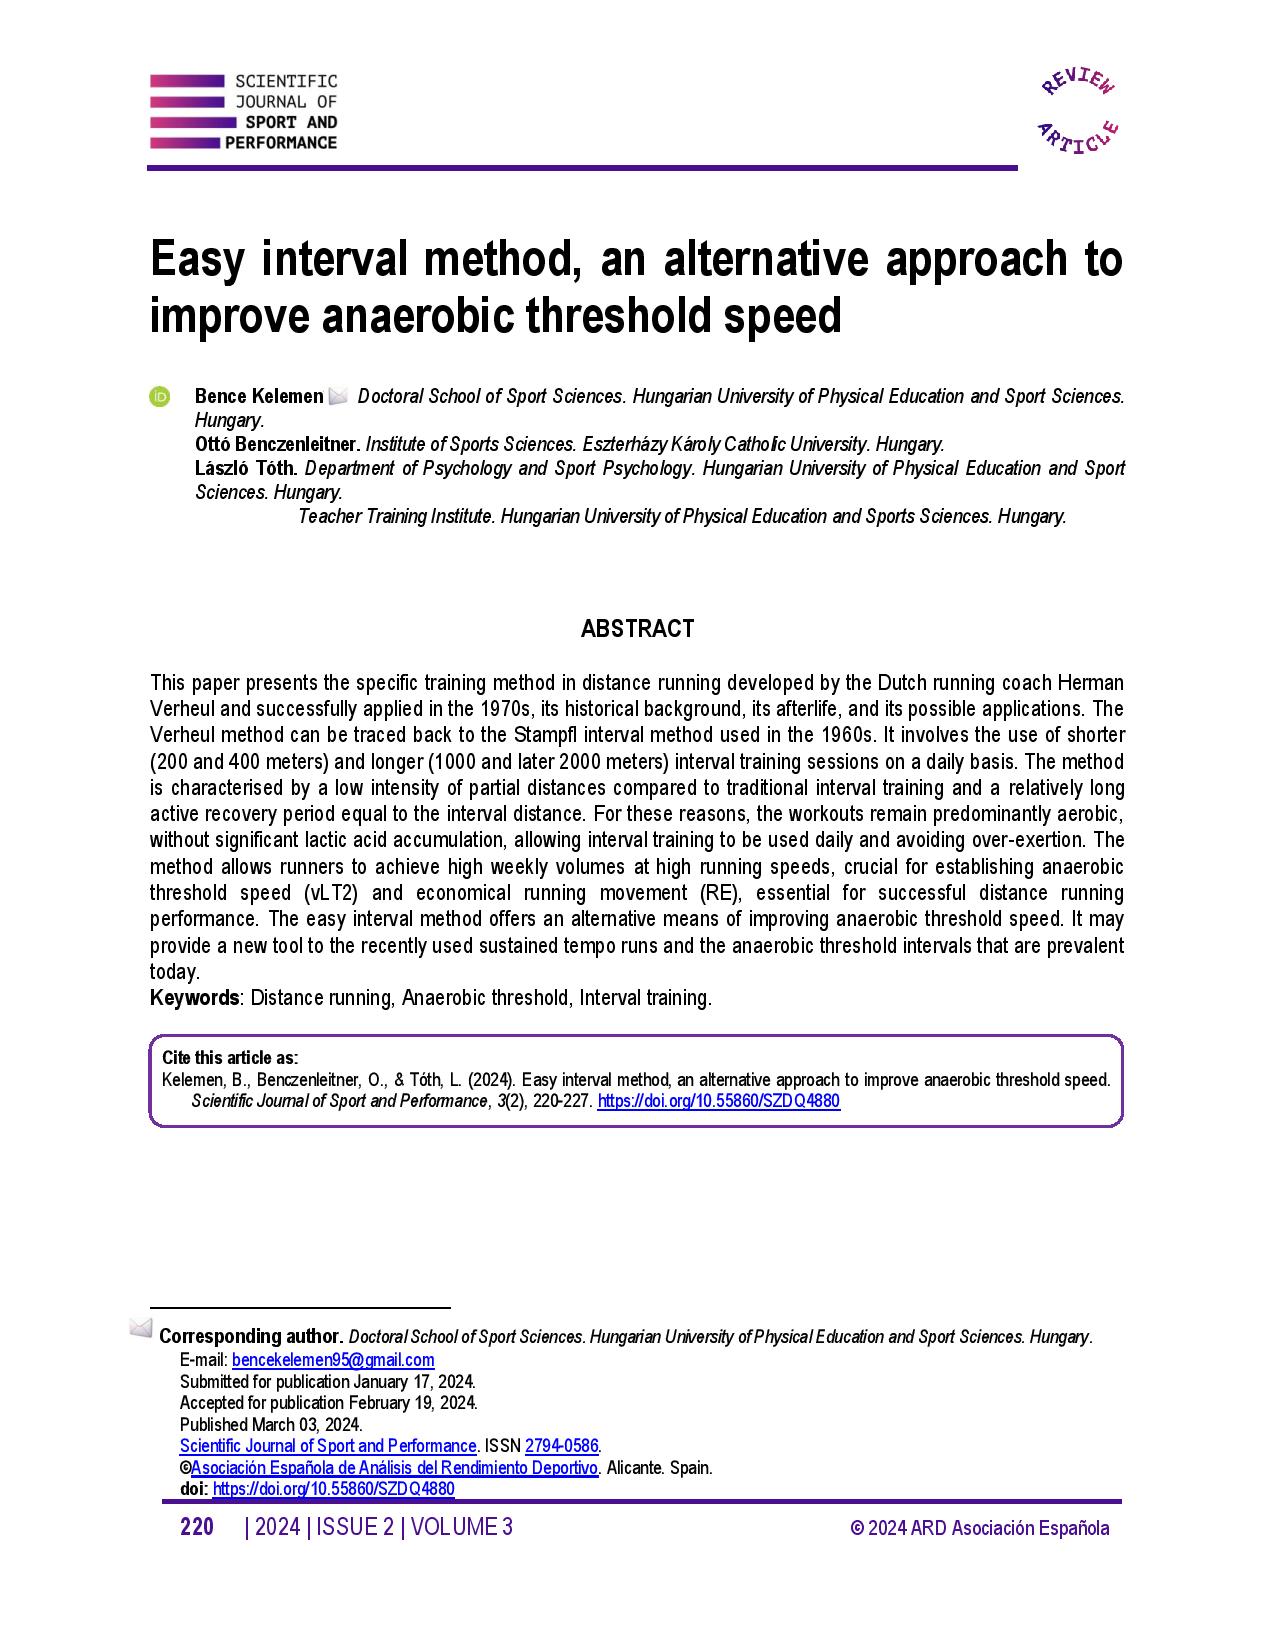 Easy interval method, an alternative approach to improve anaerobic threshold speed